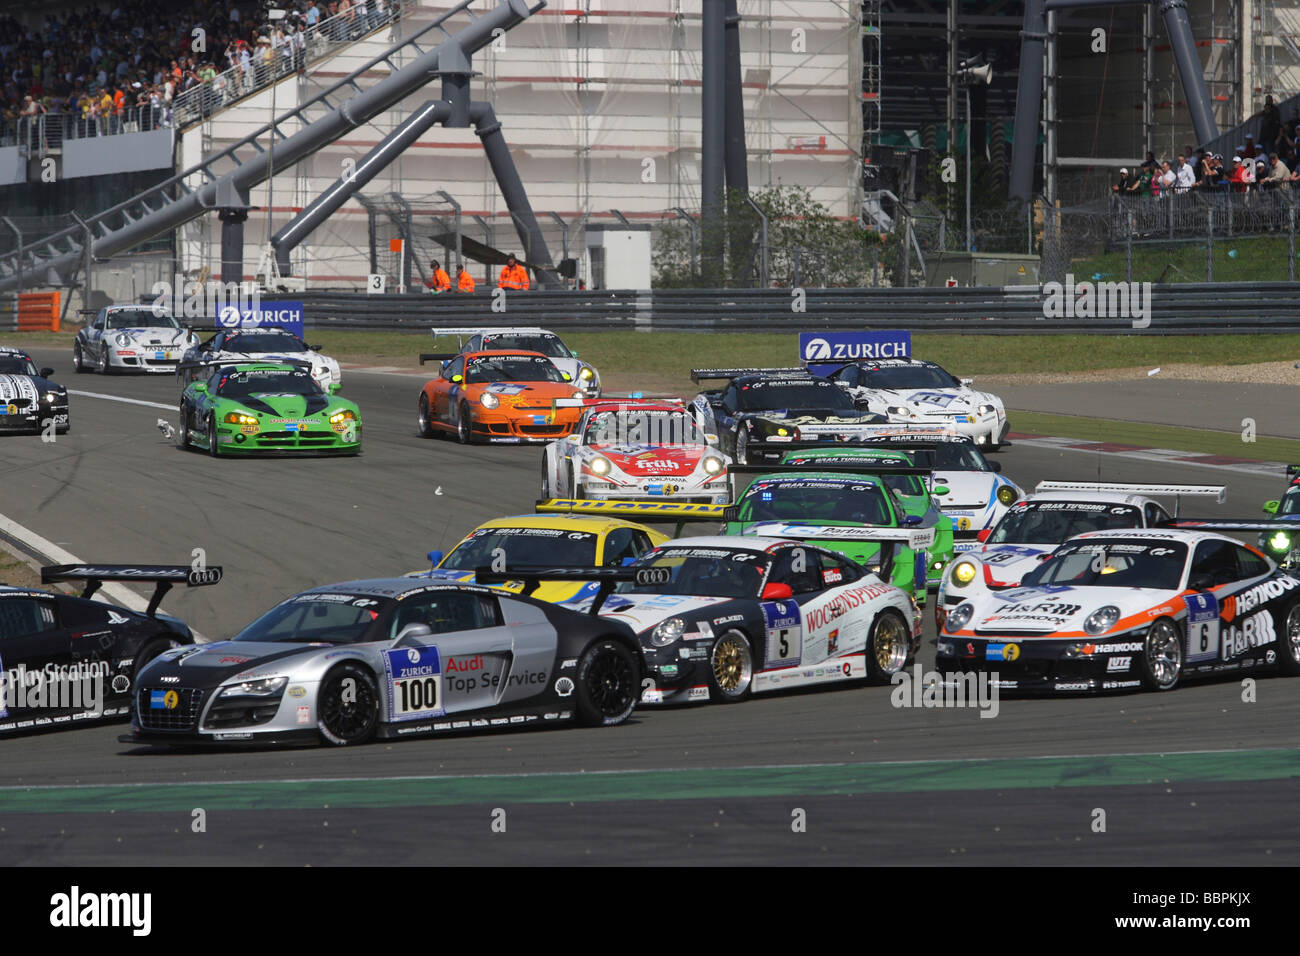 Start of the 24-hour race at the Nurburgring race track, Rhineland-Palatinate, Germany, Europe Stock Photo